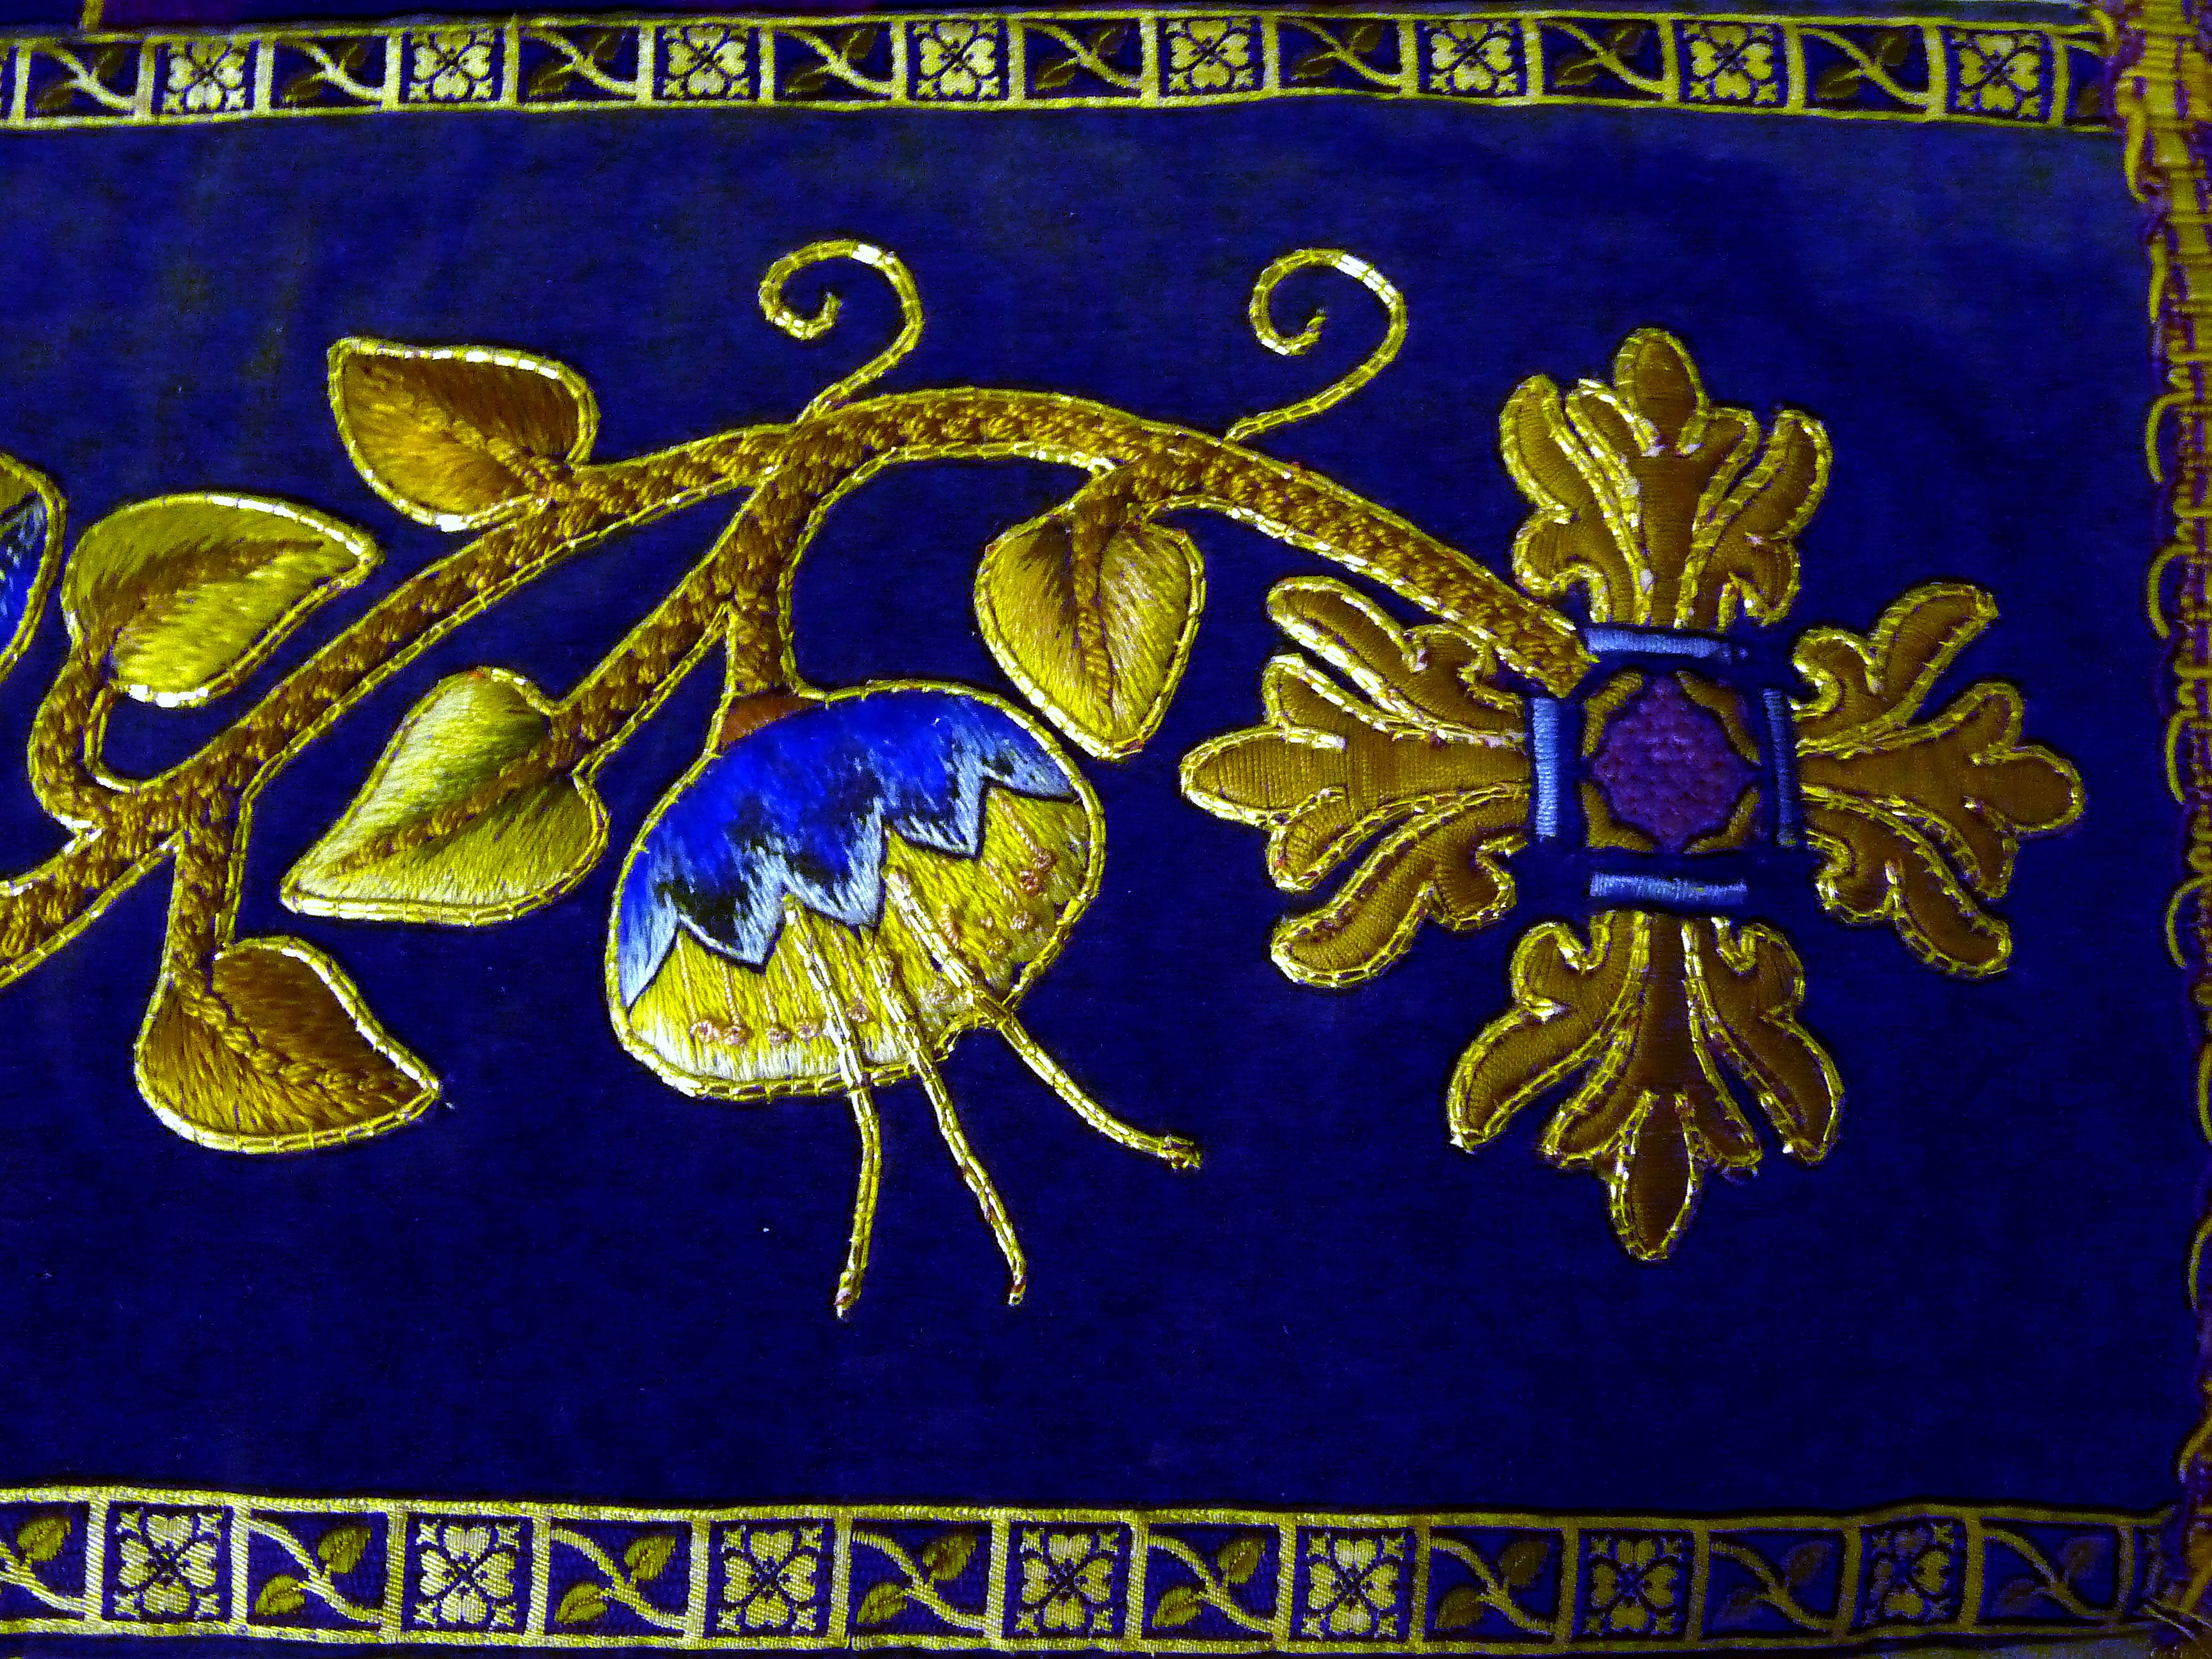 embroidery on display in Elizabeth Hoare Gallery, Liverpool Cathedral